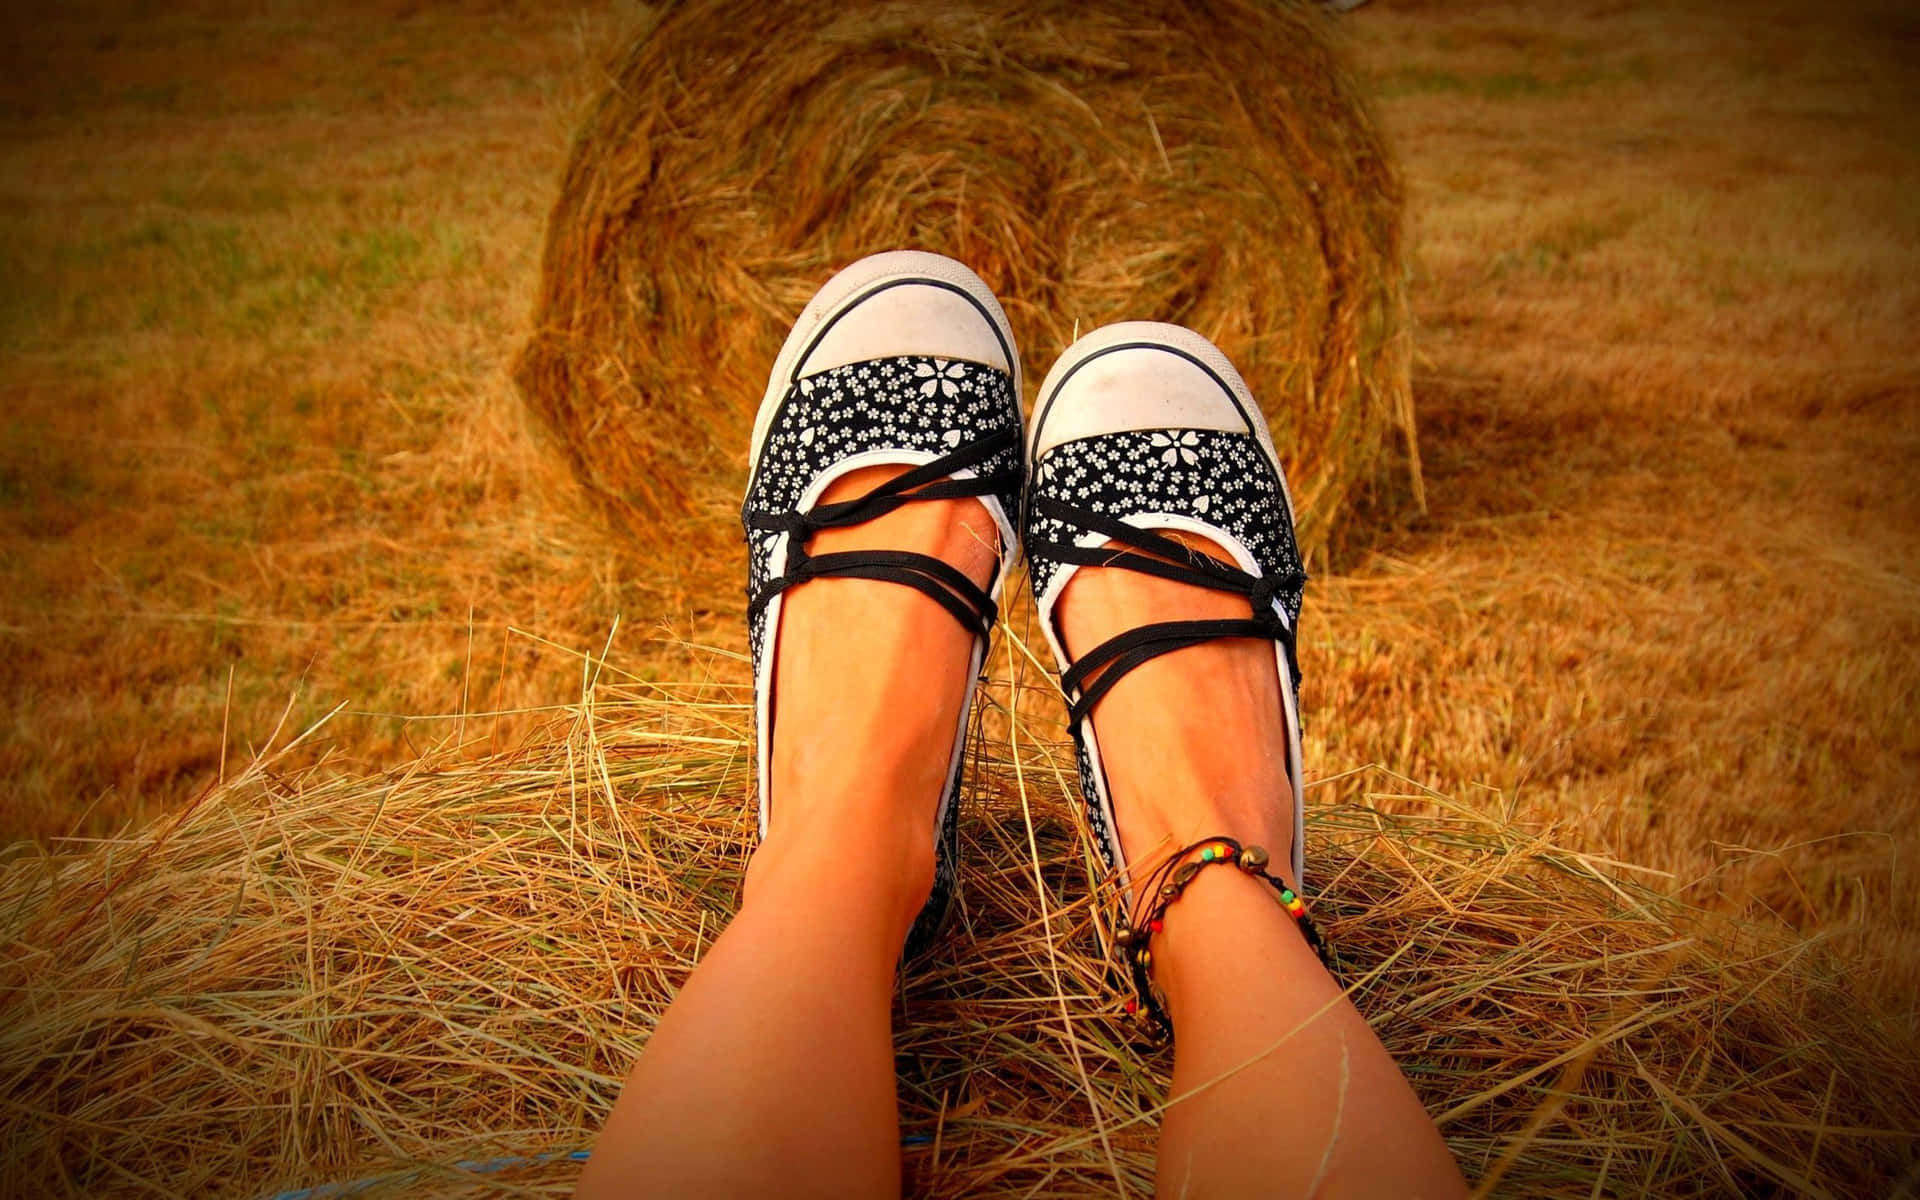 Didyou Mean Translating The Caption Into Italian For A Computer Or Mobile Wallpaper Related To An Image Of A Girl's Feet Sporting Black And White Shoes On A Hay Bale? Sfondo